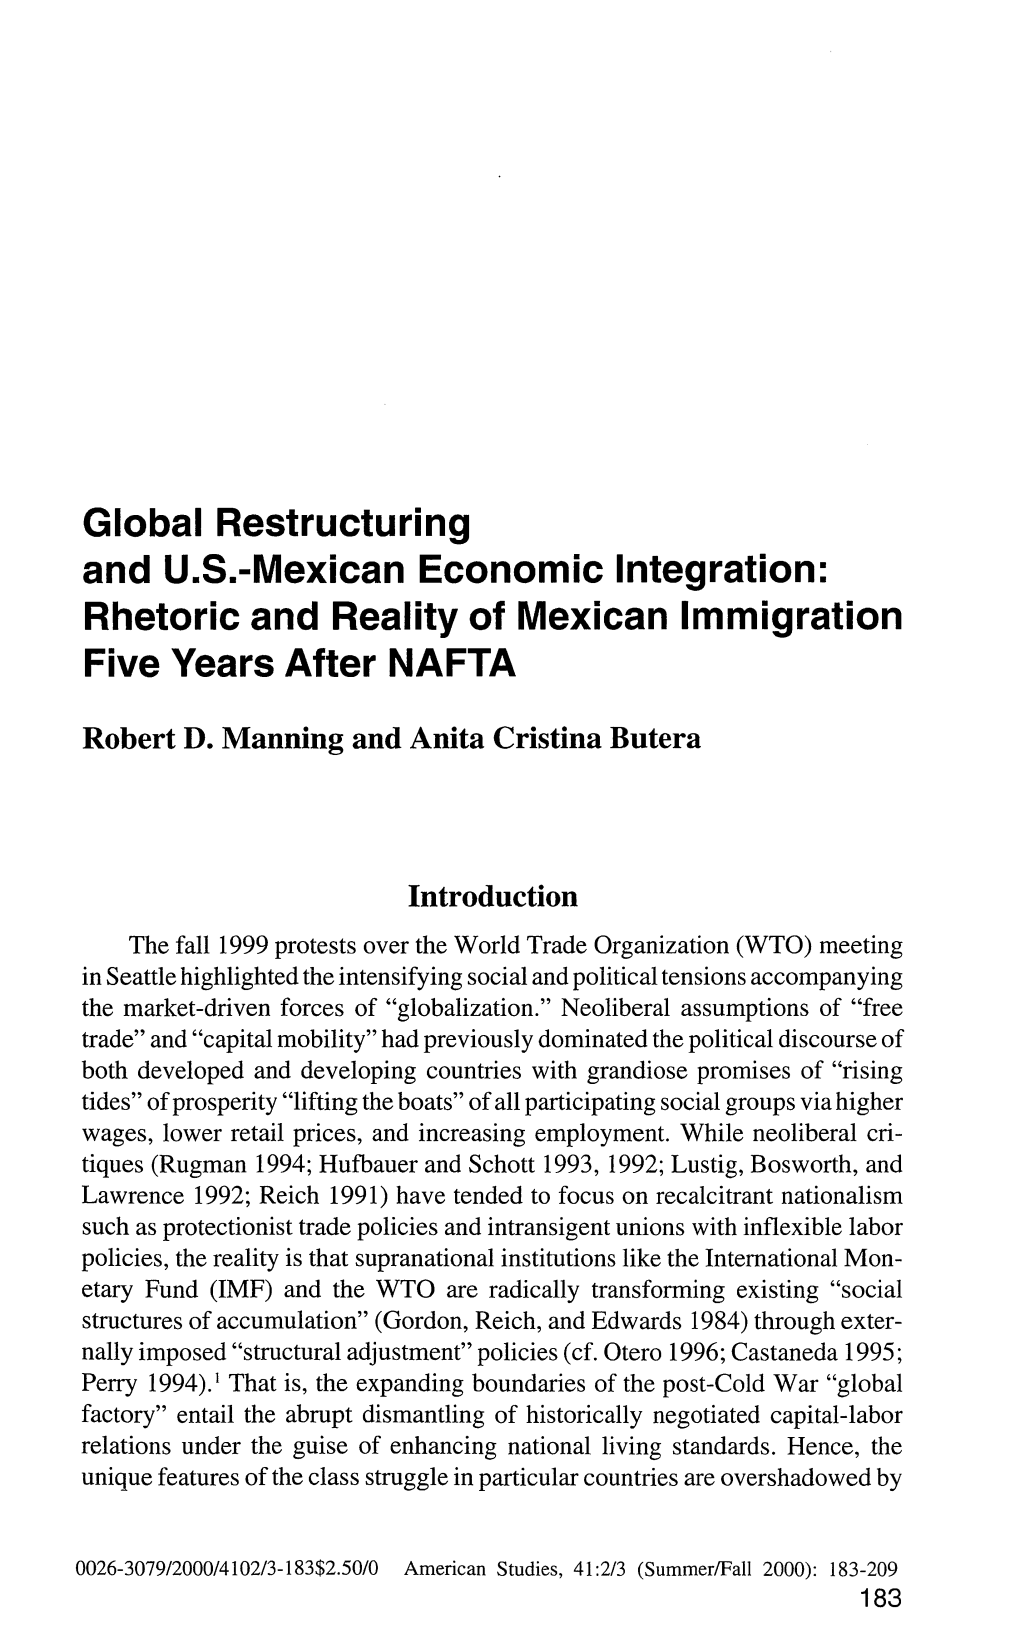 Rhetoric and Reality of Mexican Immigration Five Years After NAFTA